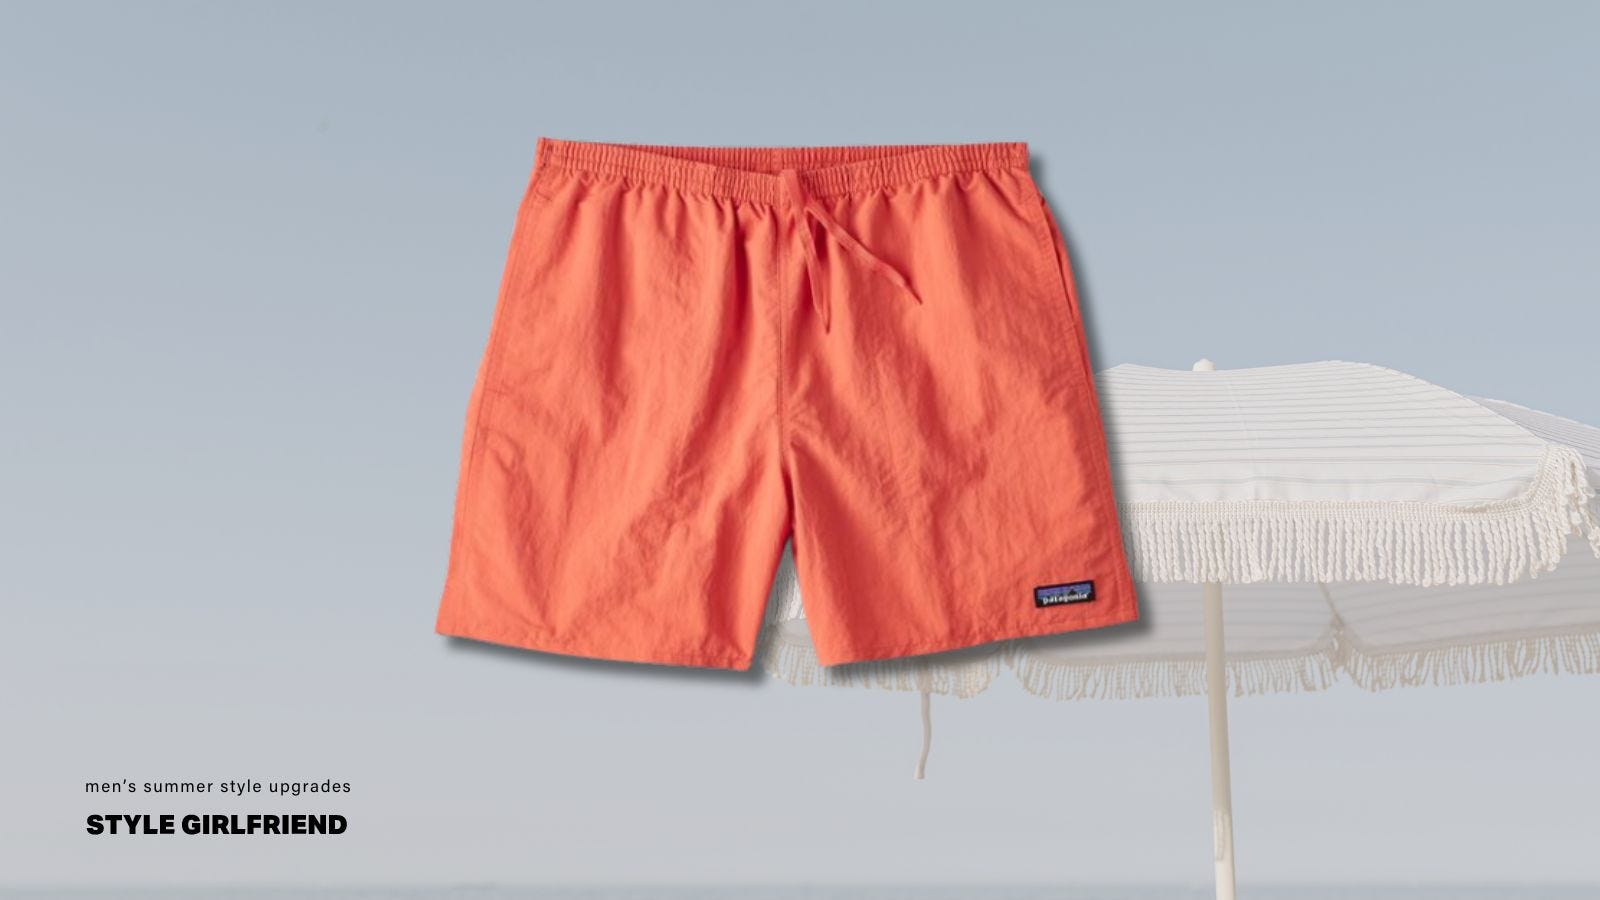 A pair of peach colored Patagonia suspender shorts on a beach background image